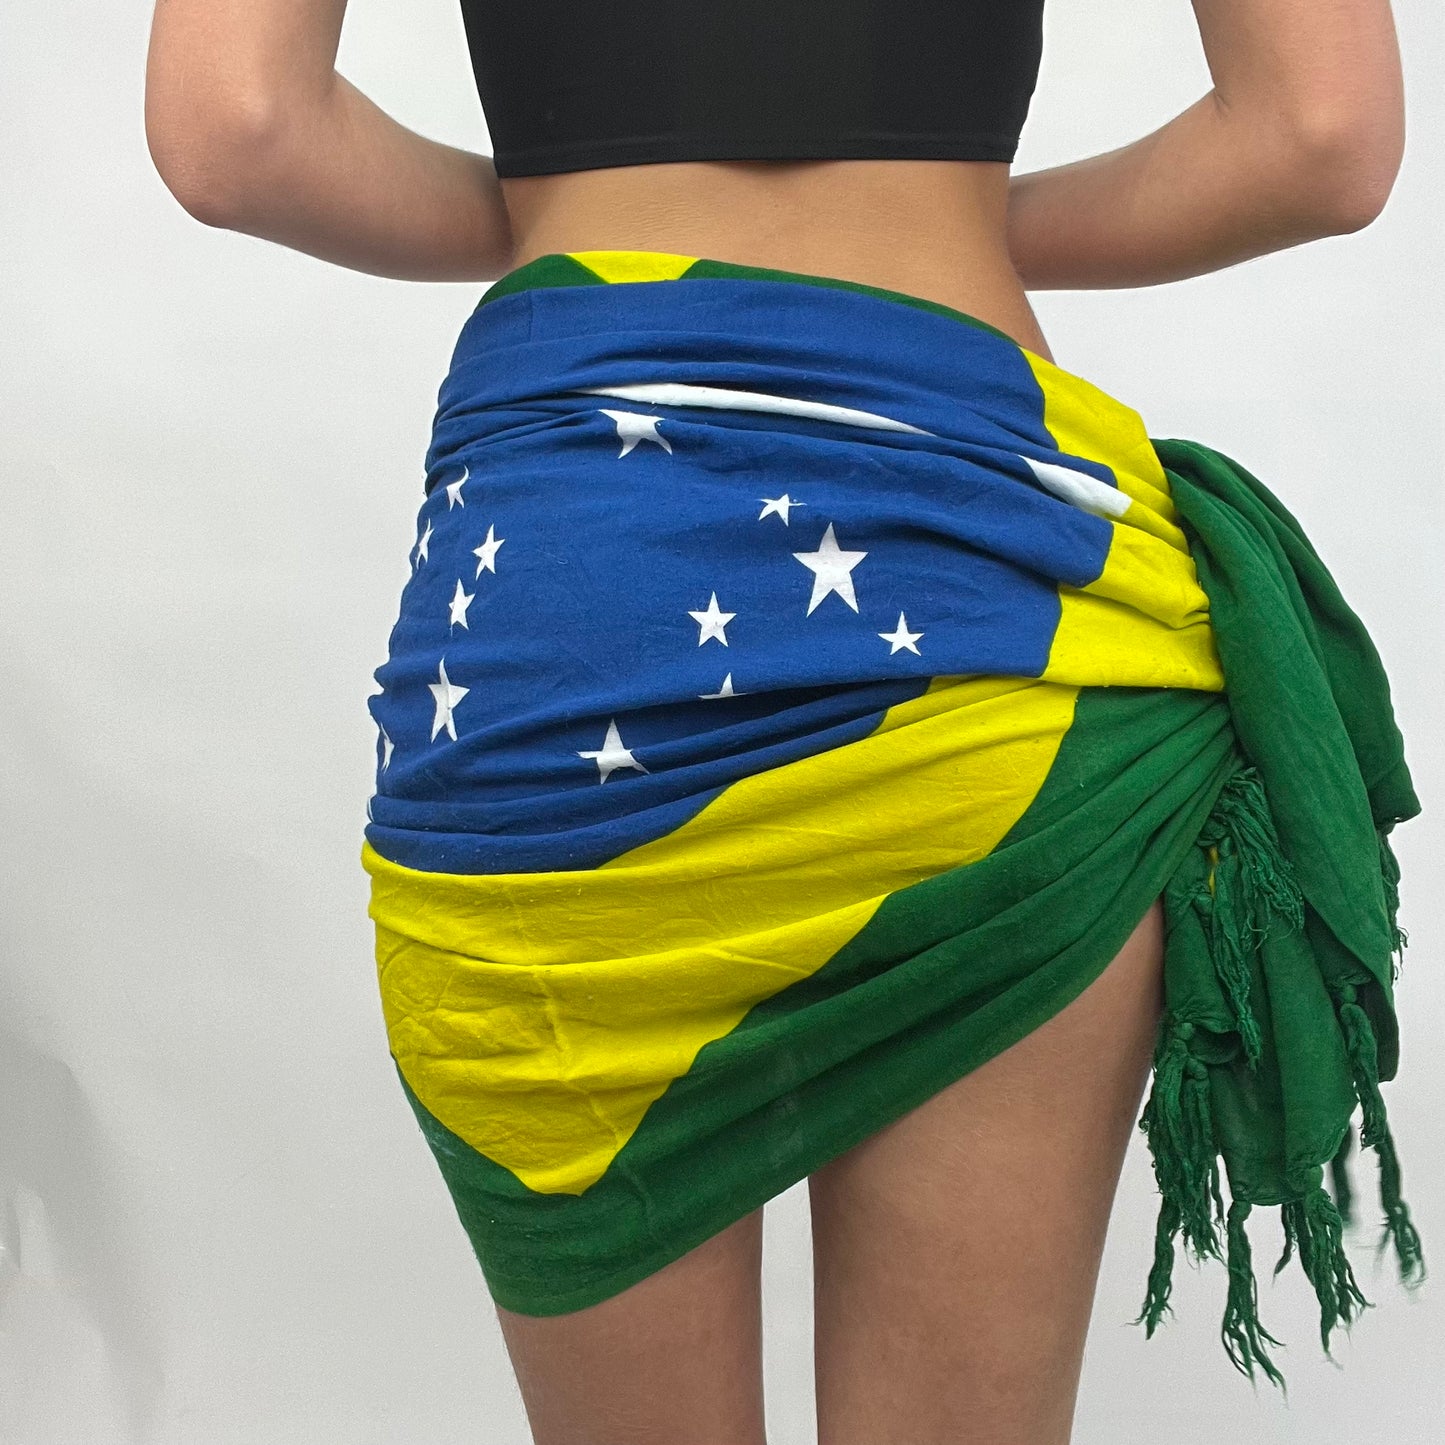 💻HIPPY CHIC DROP | brazil yellow green and blue sarong wrap with ‘ordem e progresso’ spellout